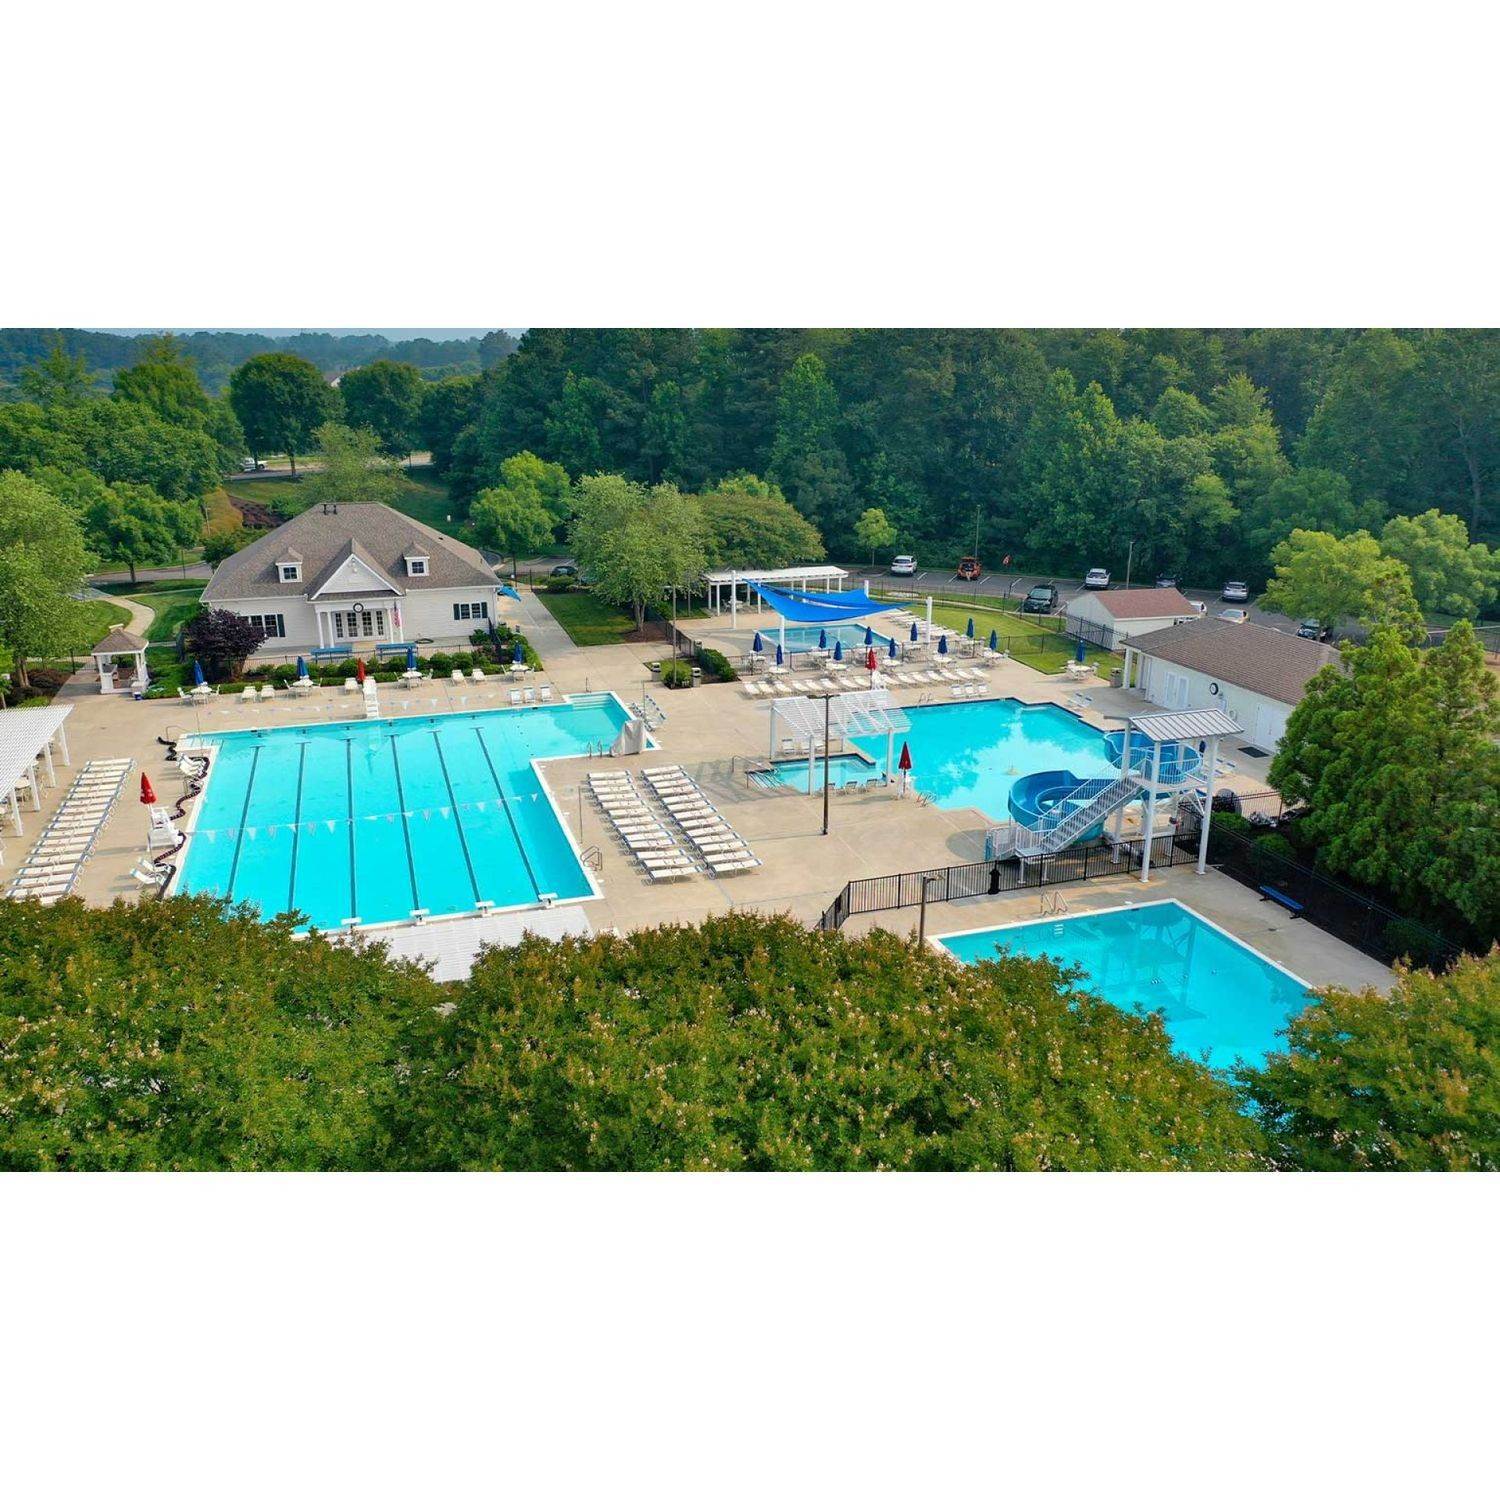 3. The Pointe at Twin Hickory здание в 4605 Pouncey Tract Road, Glen Allen, VA 23059